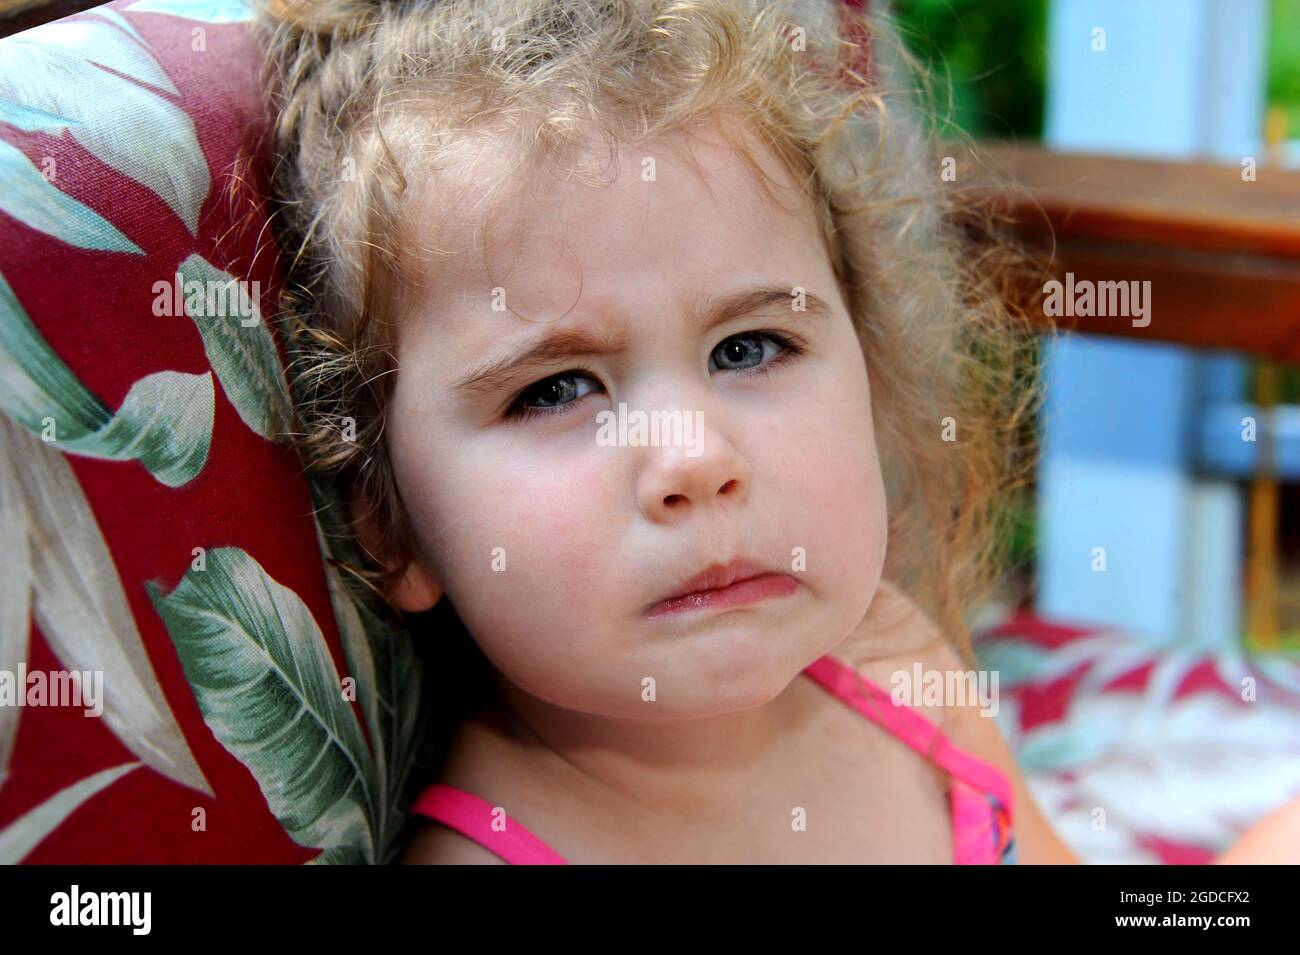 Little girl has her face screwed up in a scowl.  Her attitude is crabby and fussy.  She has curly hair. Stock Photo